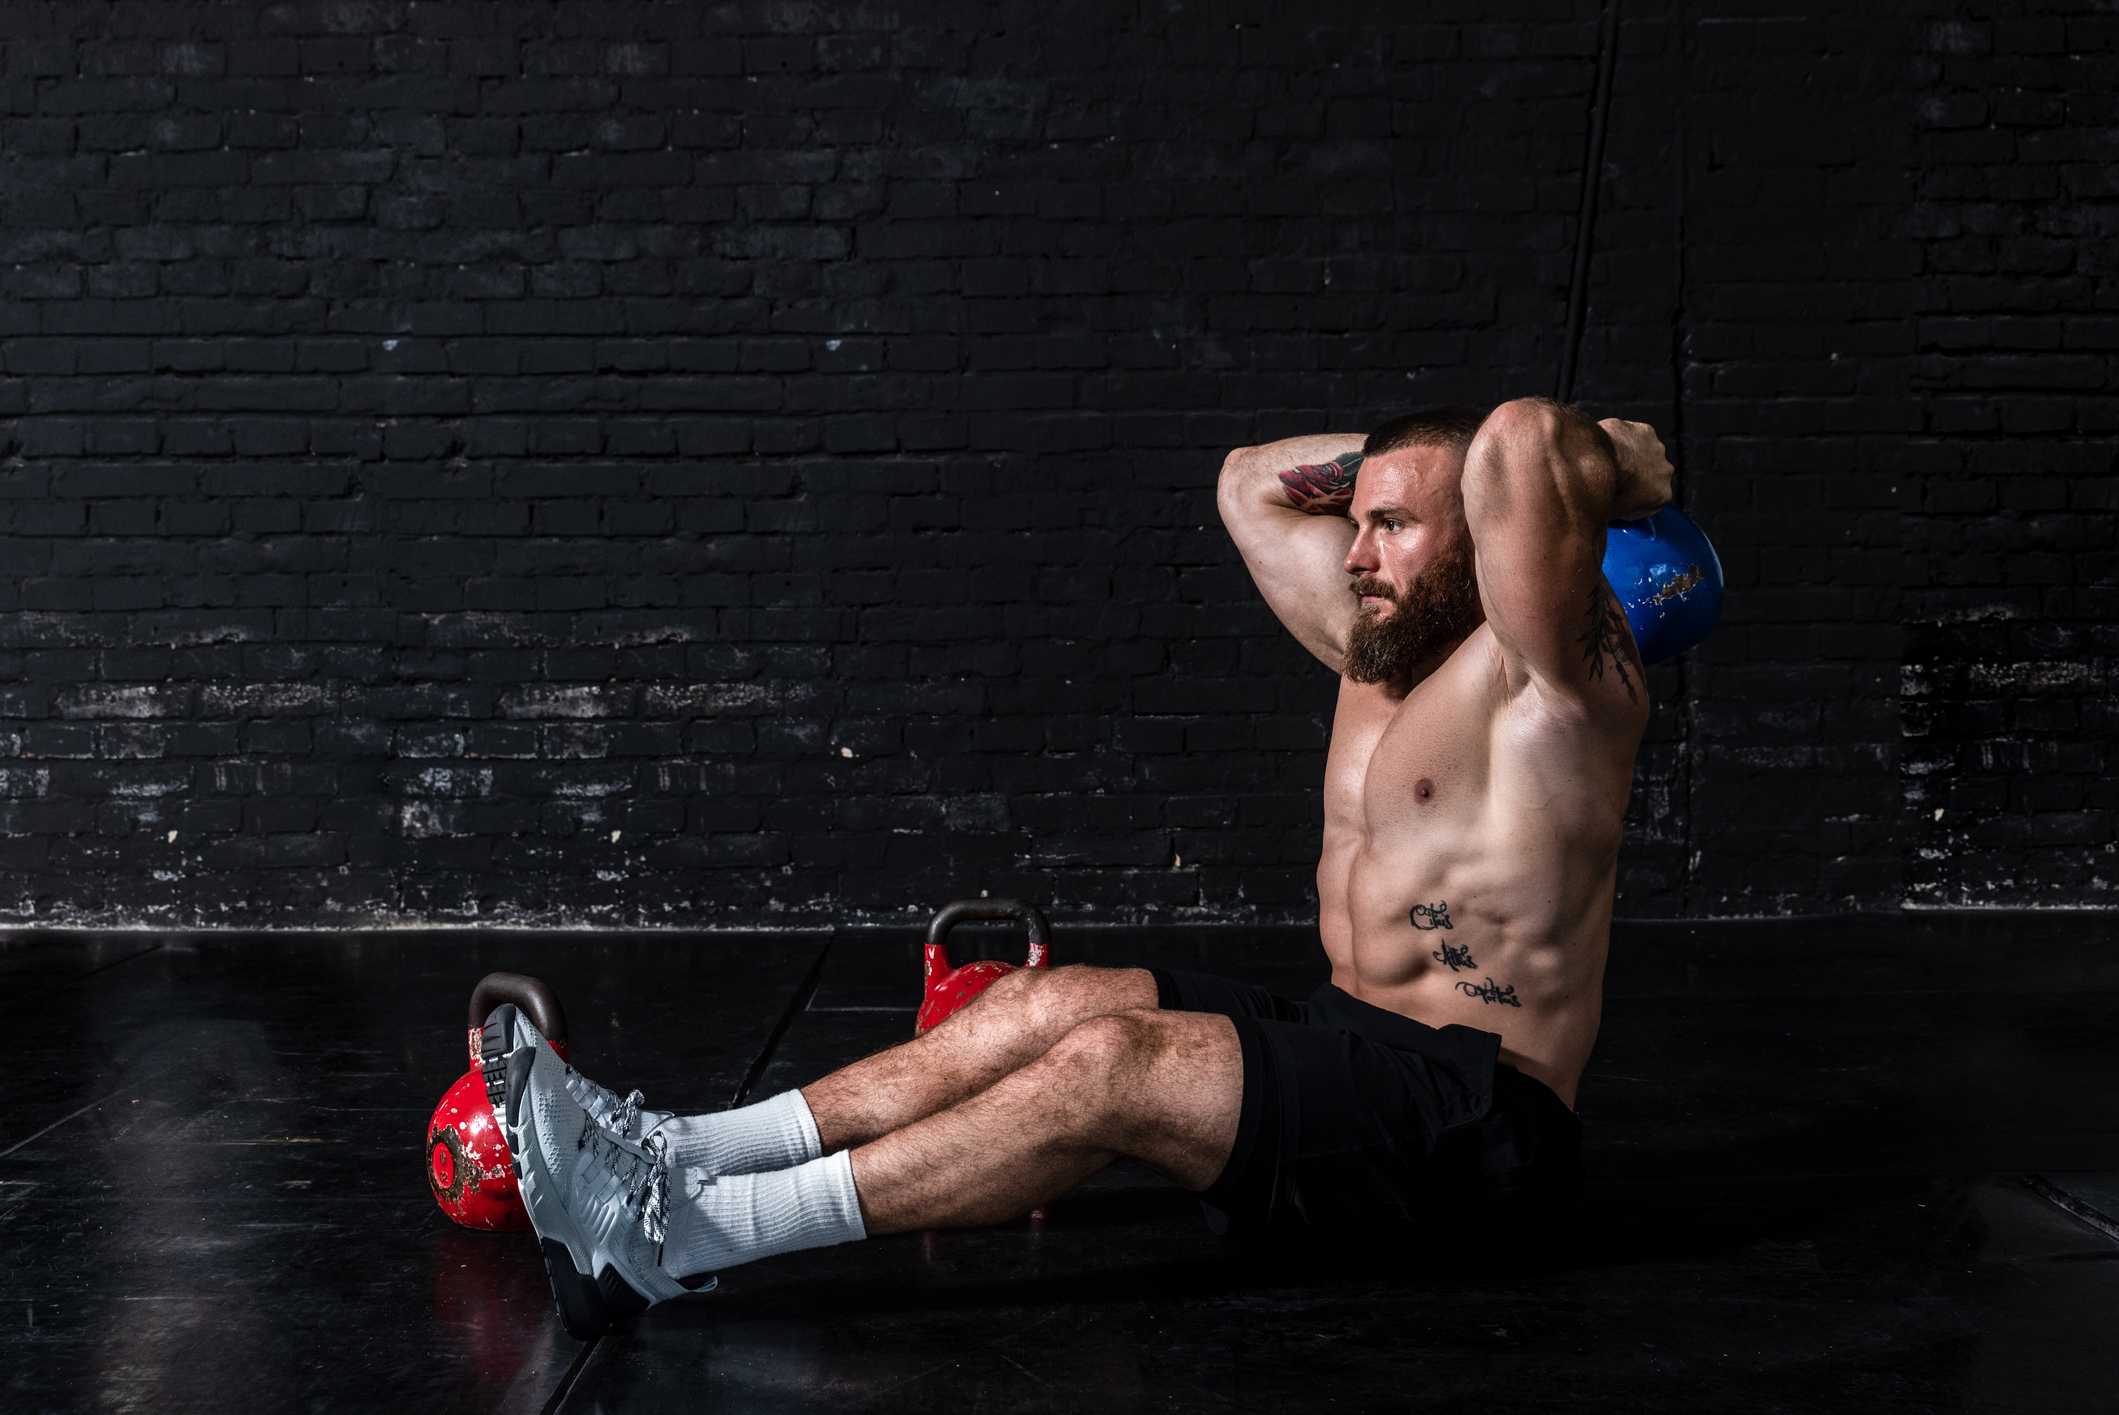 Pushup training tips: Give your upper body strength a boost - The Manual